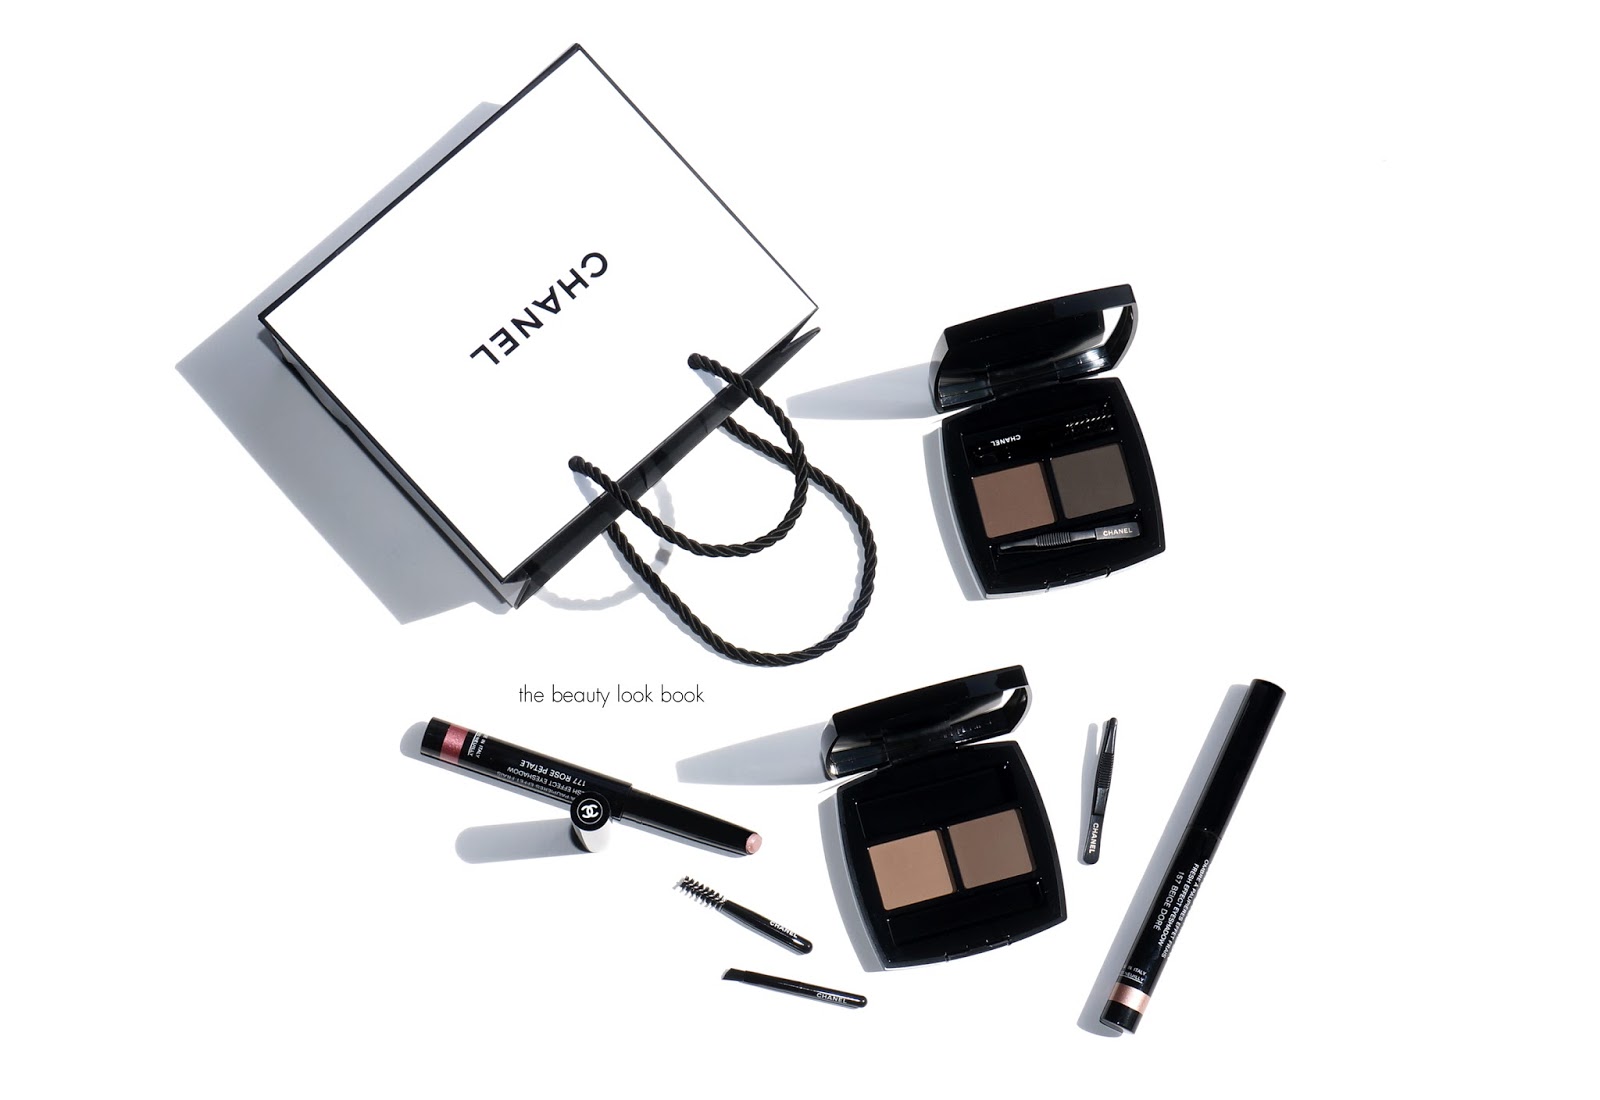 LA PALETTE SOURCILS Brow-filling and defining wax and powder duo 01 - Light  | CHANEL